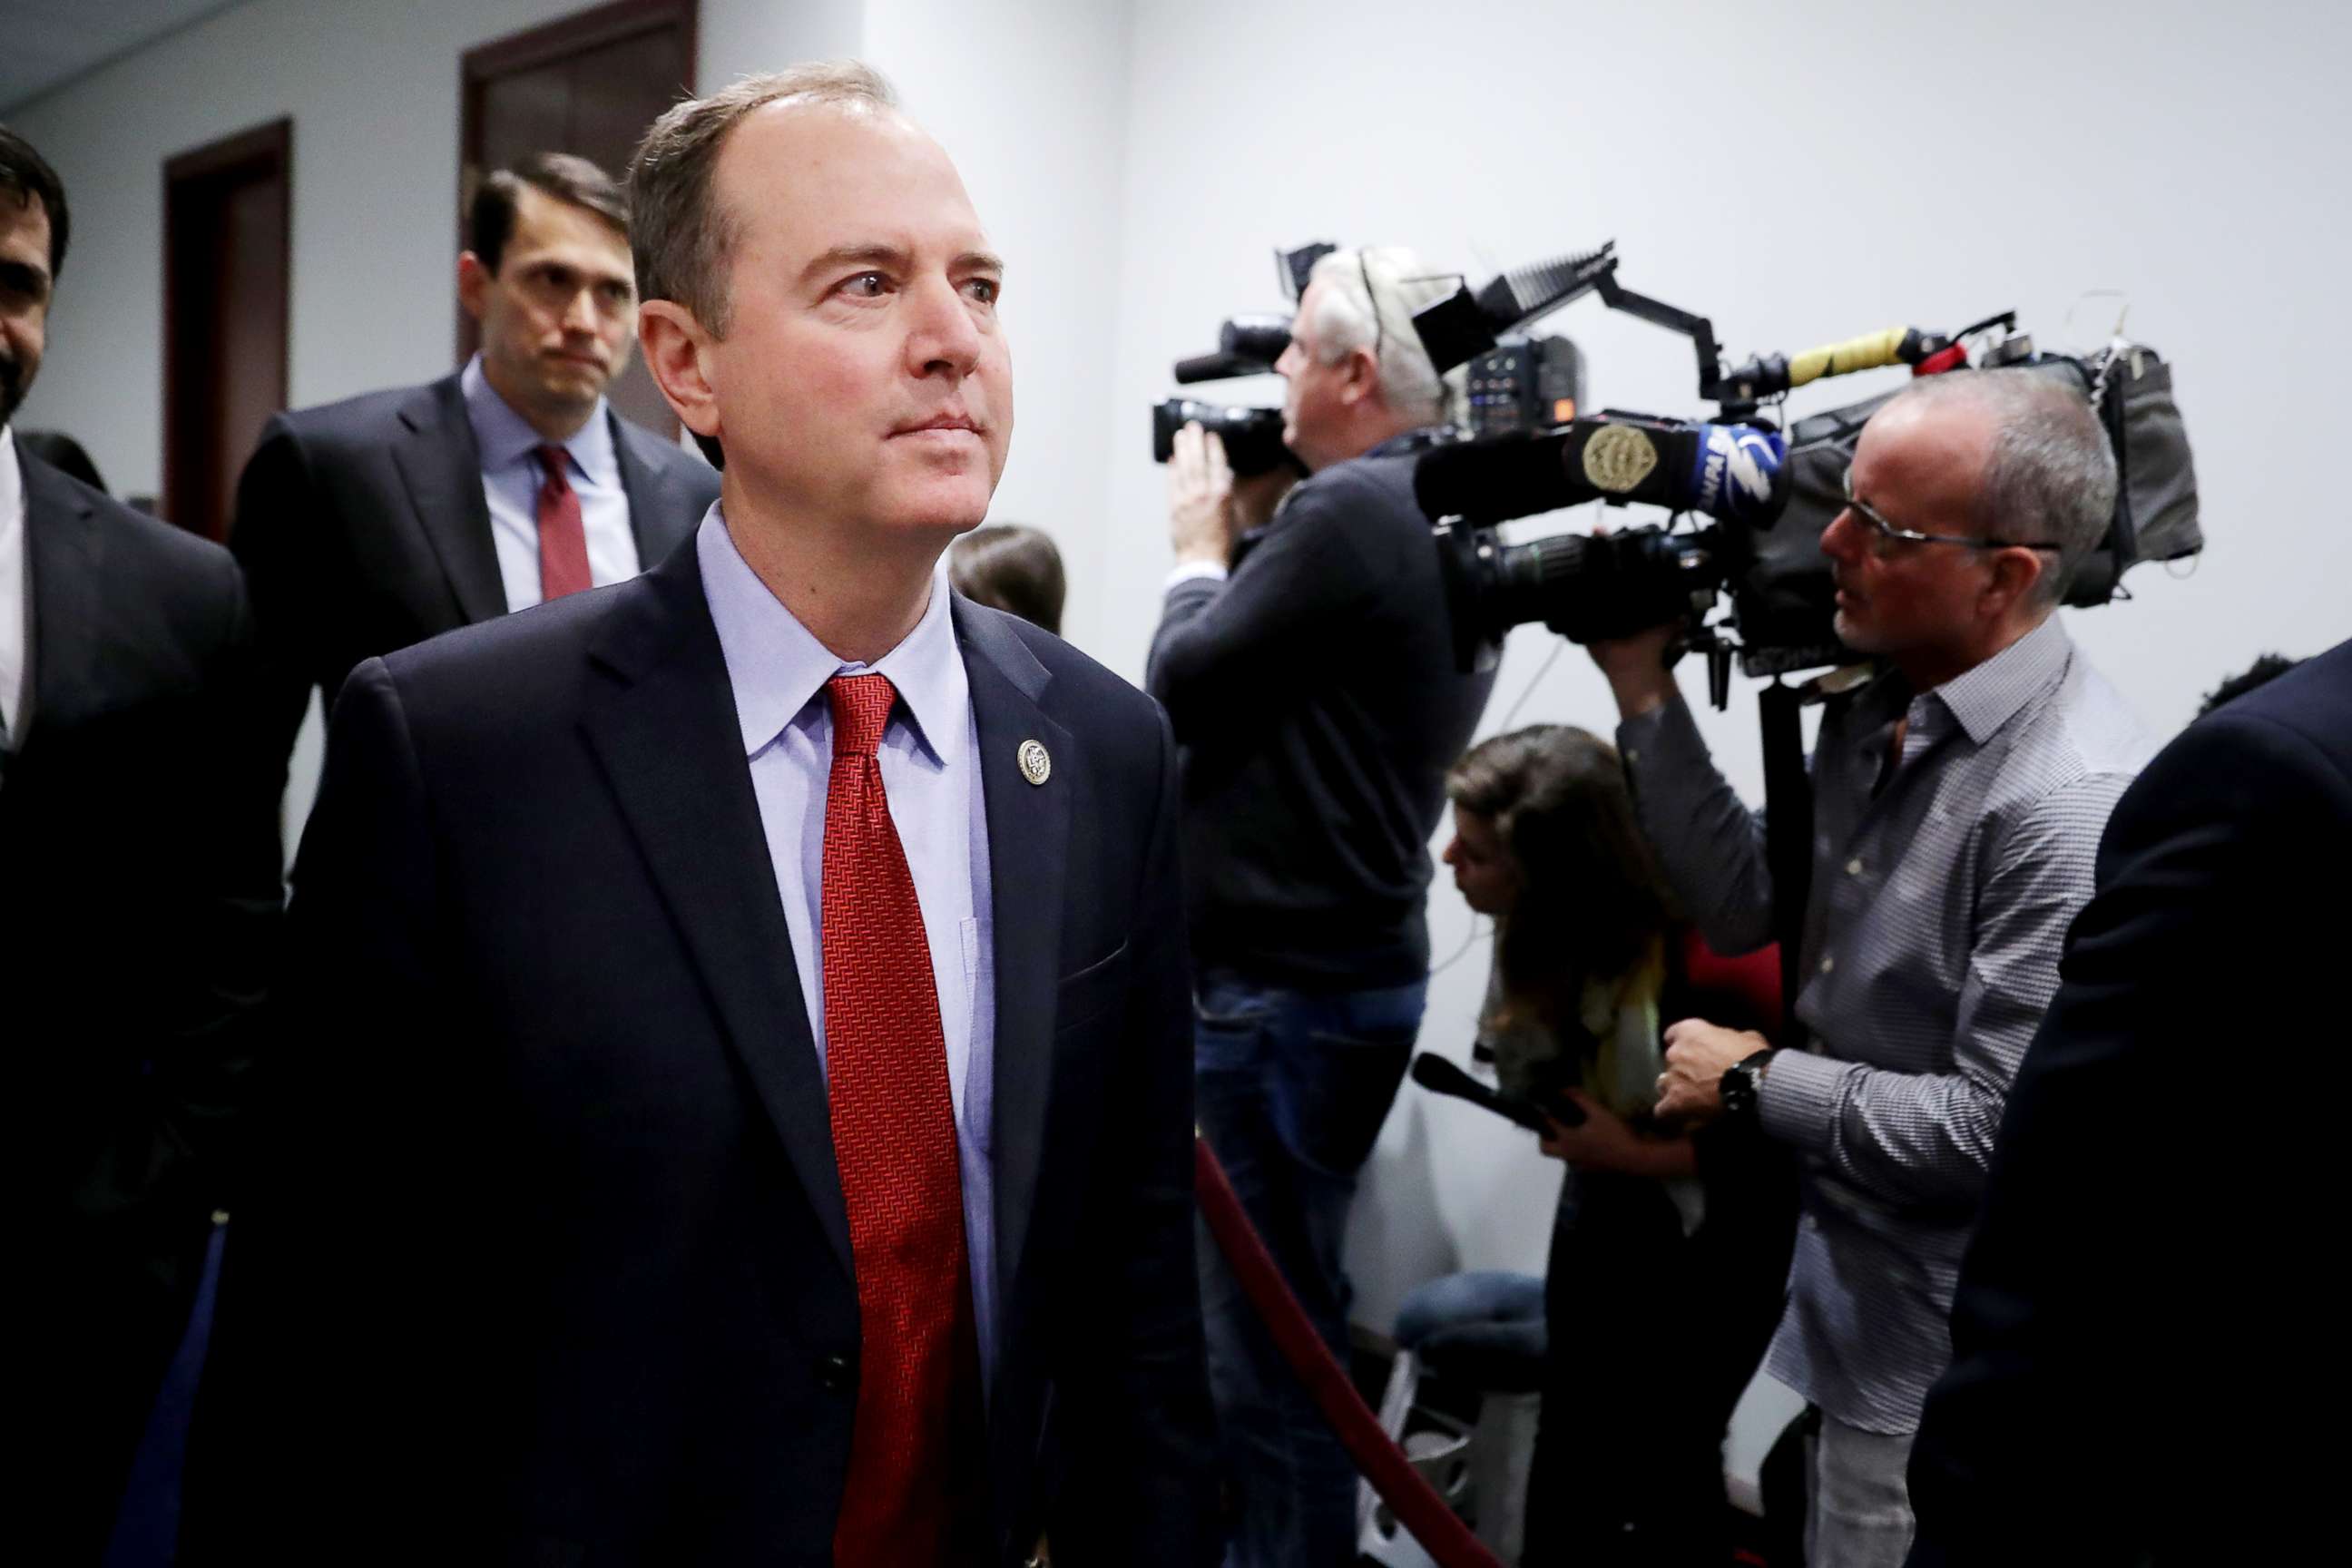 PHOTO: House Intelligence Committee ranking member Rep. Adam Schiff arrives for a Democratic caucus meeting in the U.S. Capitol Visitors Center Nov. 14, 2018, in Washington, D.C.